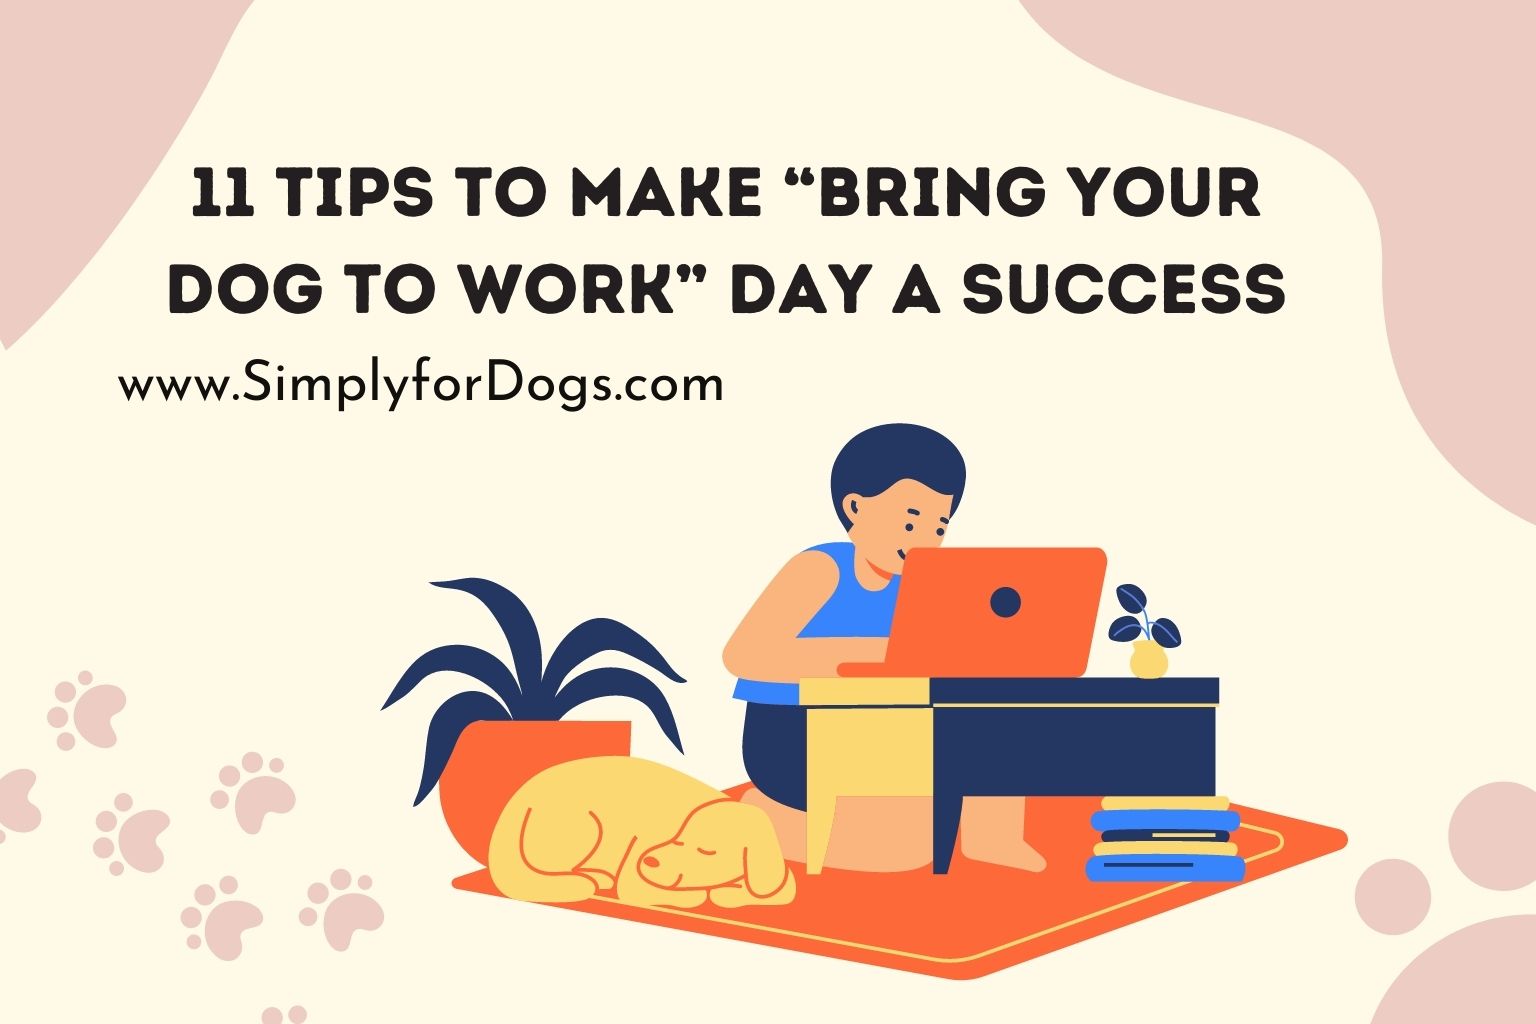 11 Tips to Make “Bring Your Dog to Work” Day a Success